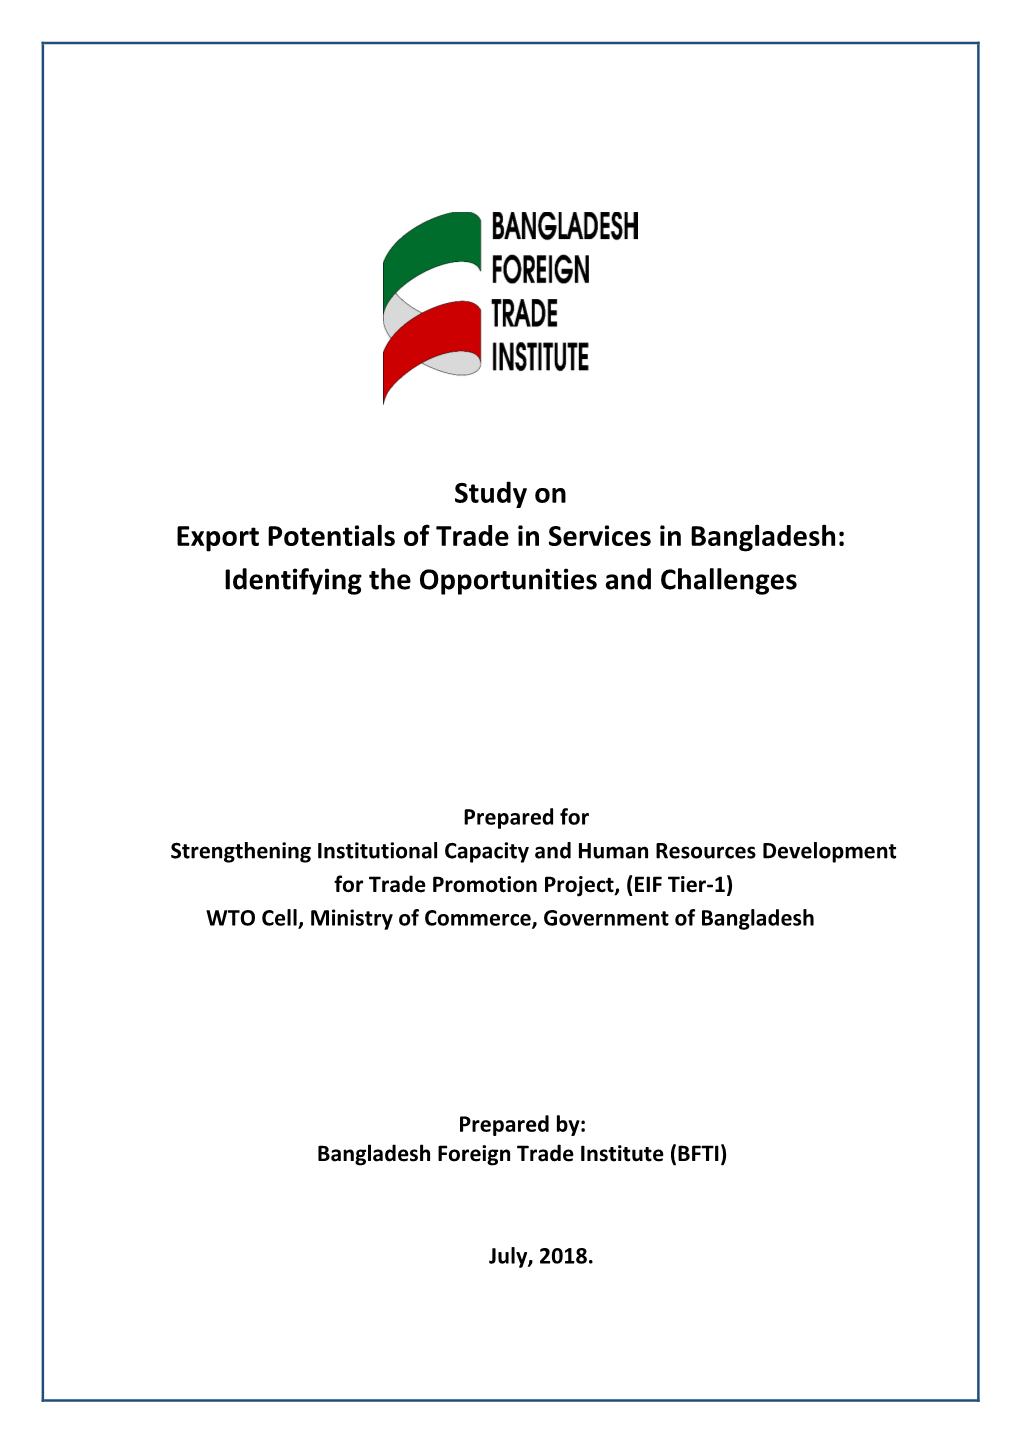 Study on Export Potentials of Trade in Services in Bangladesh: Identifying the Opportunities and Challenges